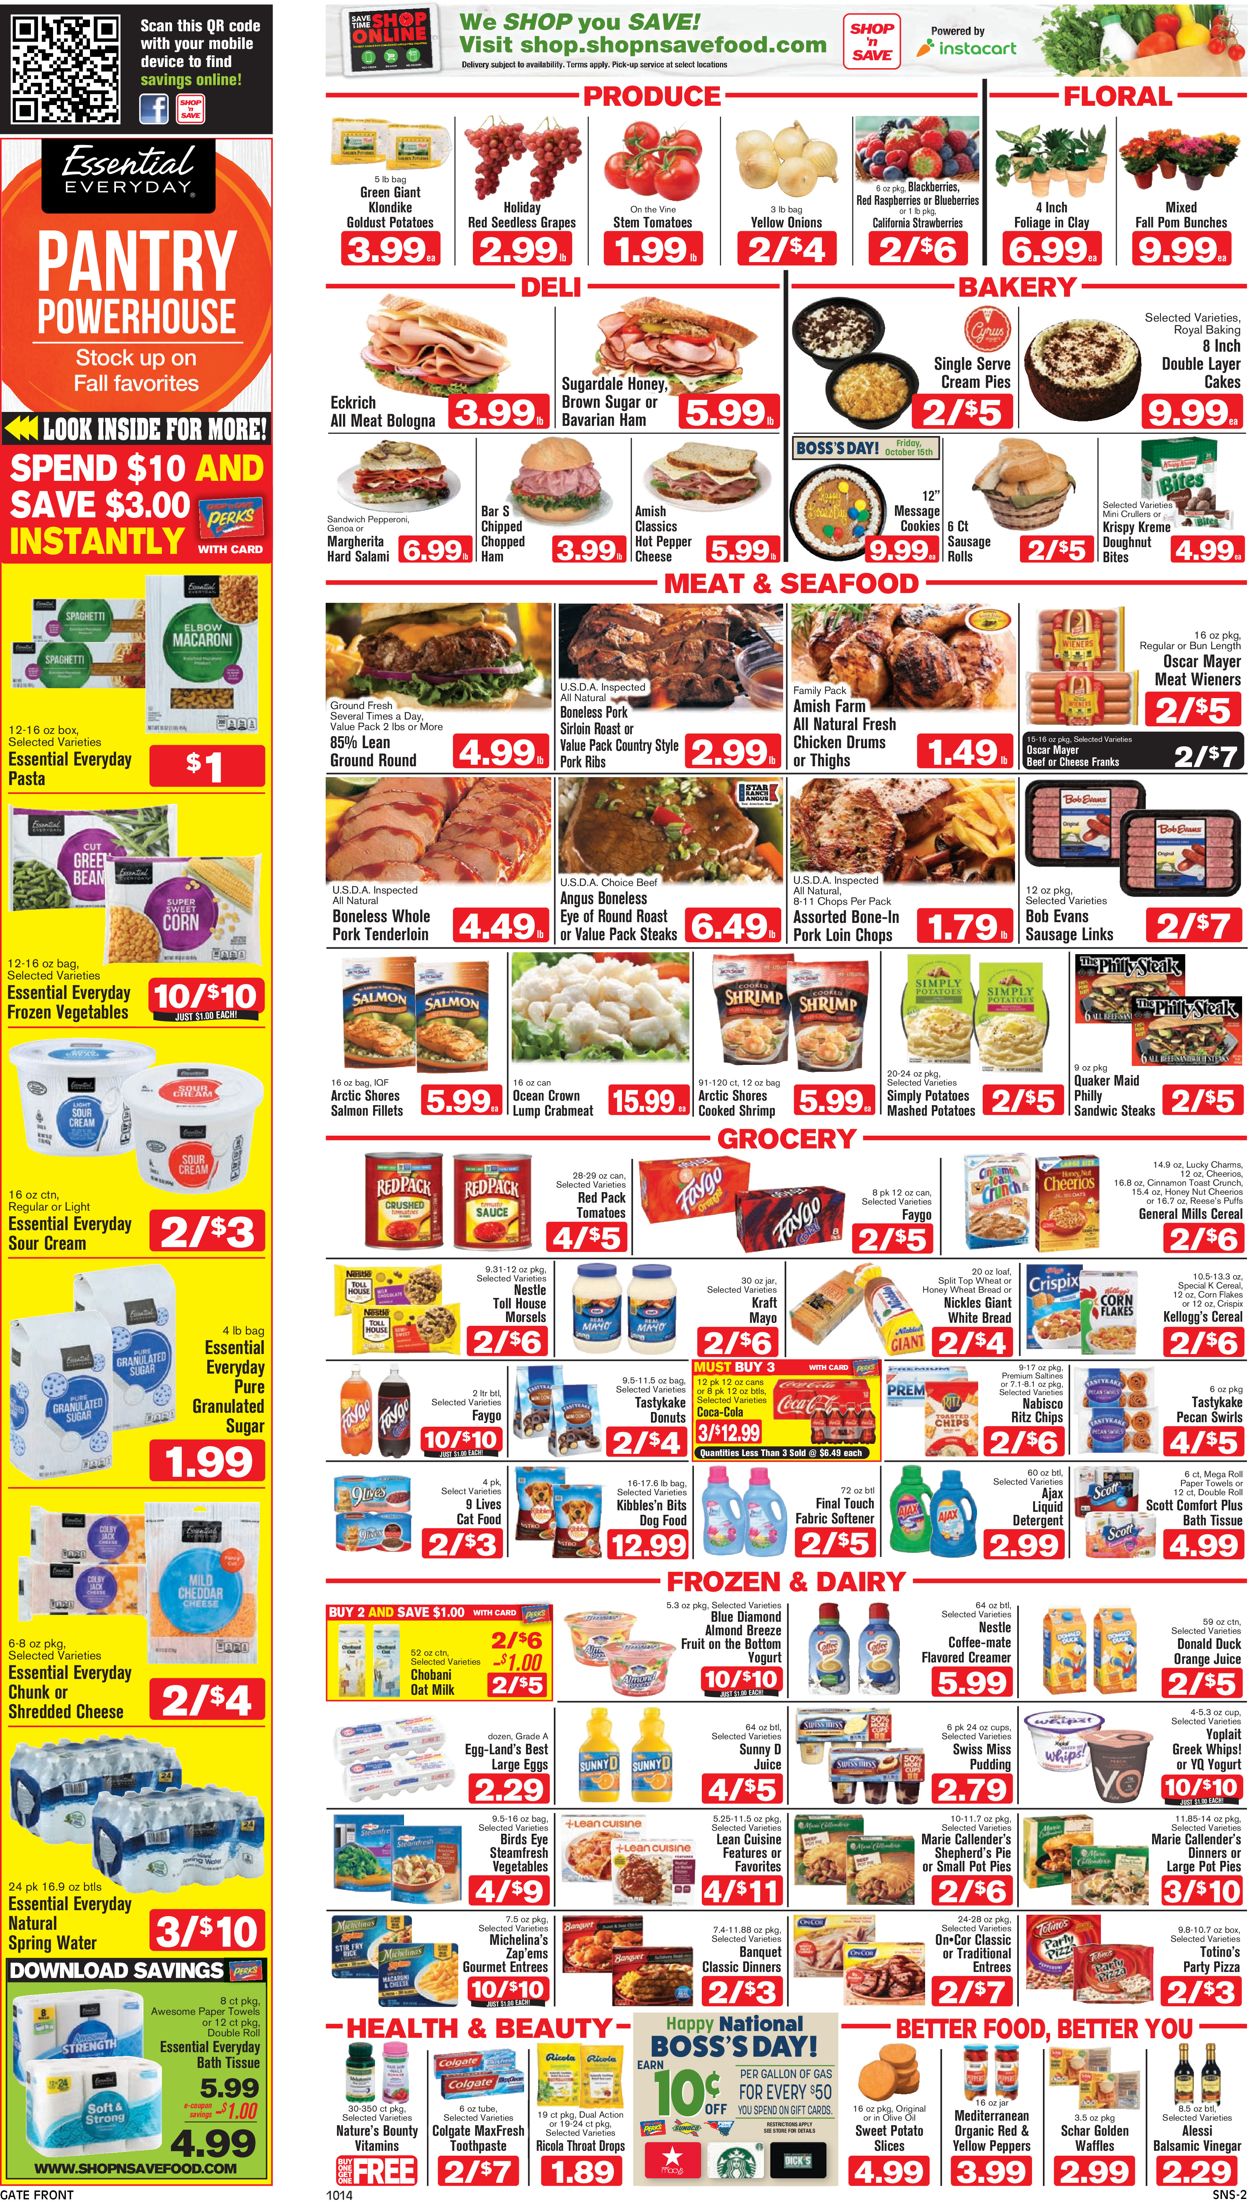 Shop ‘n Save (Pittsburgh) Ad from 10/14/2021